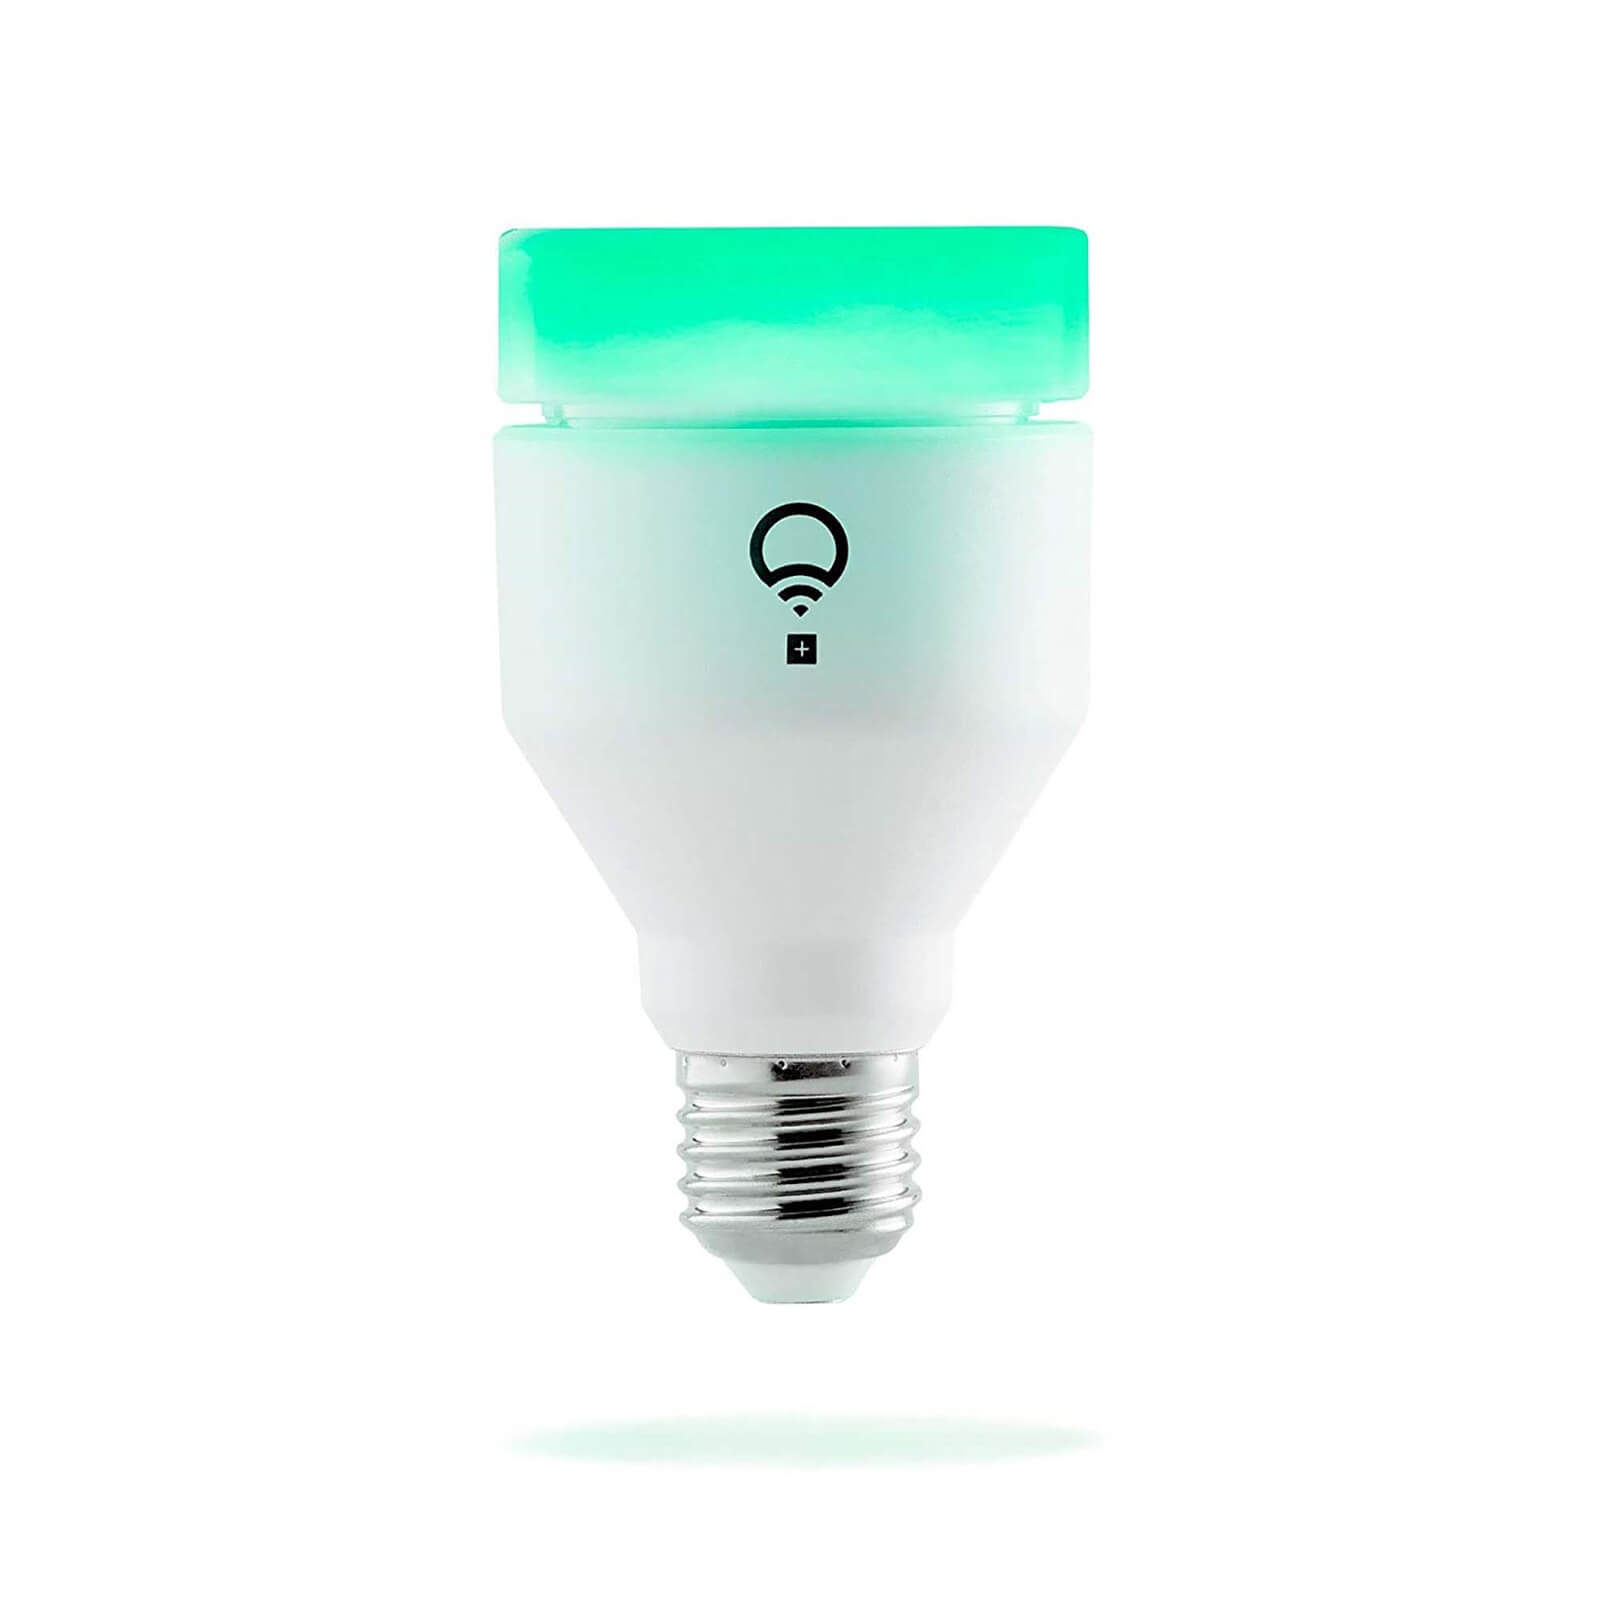 LIFX + (E27) Wi-Fi Smart LED Light Bulb with Infrared for Night Vision